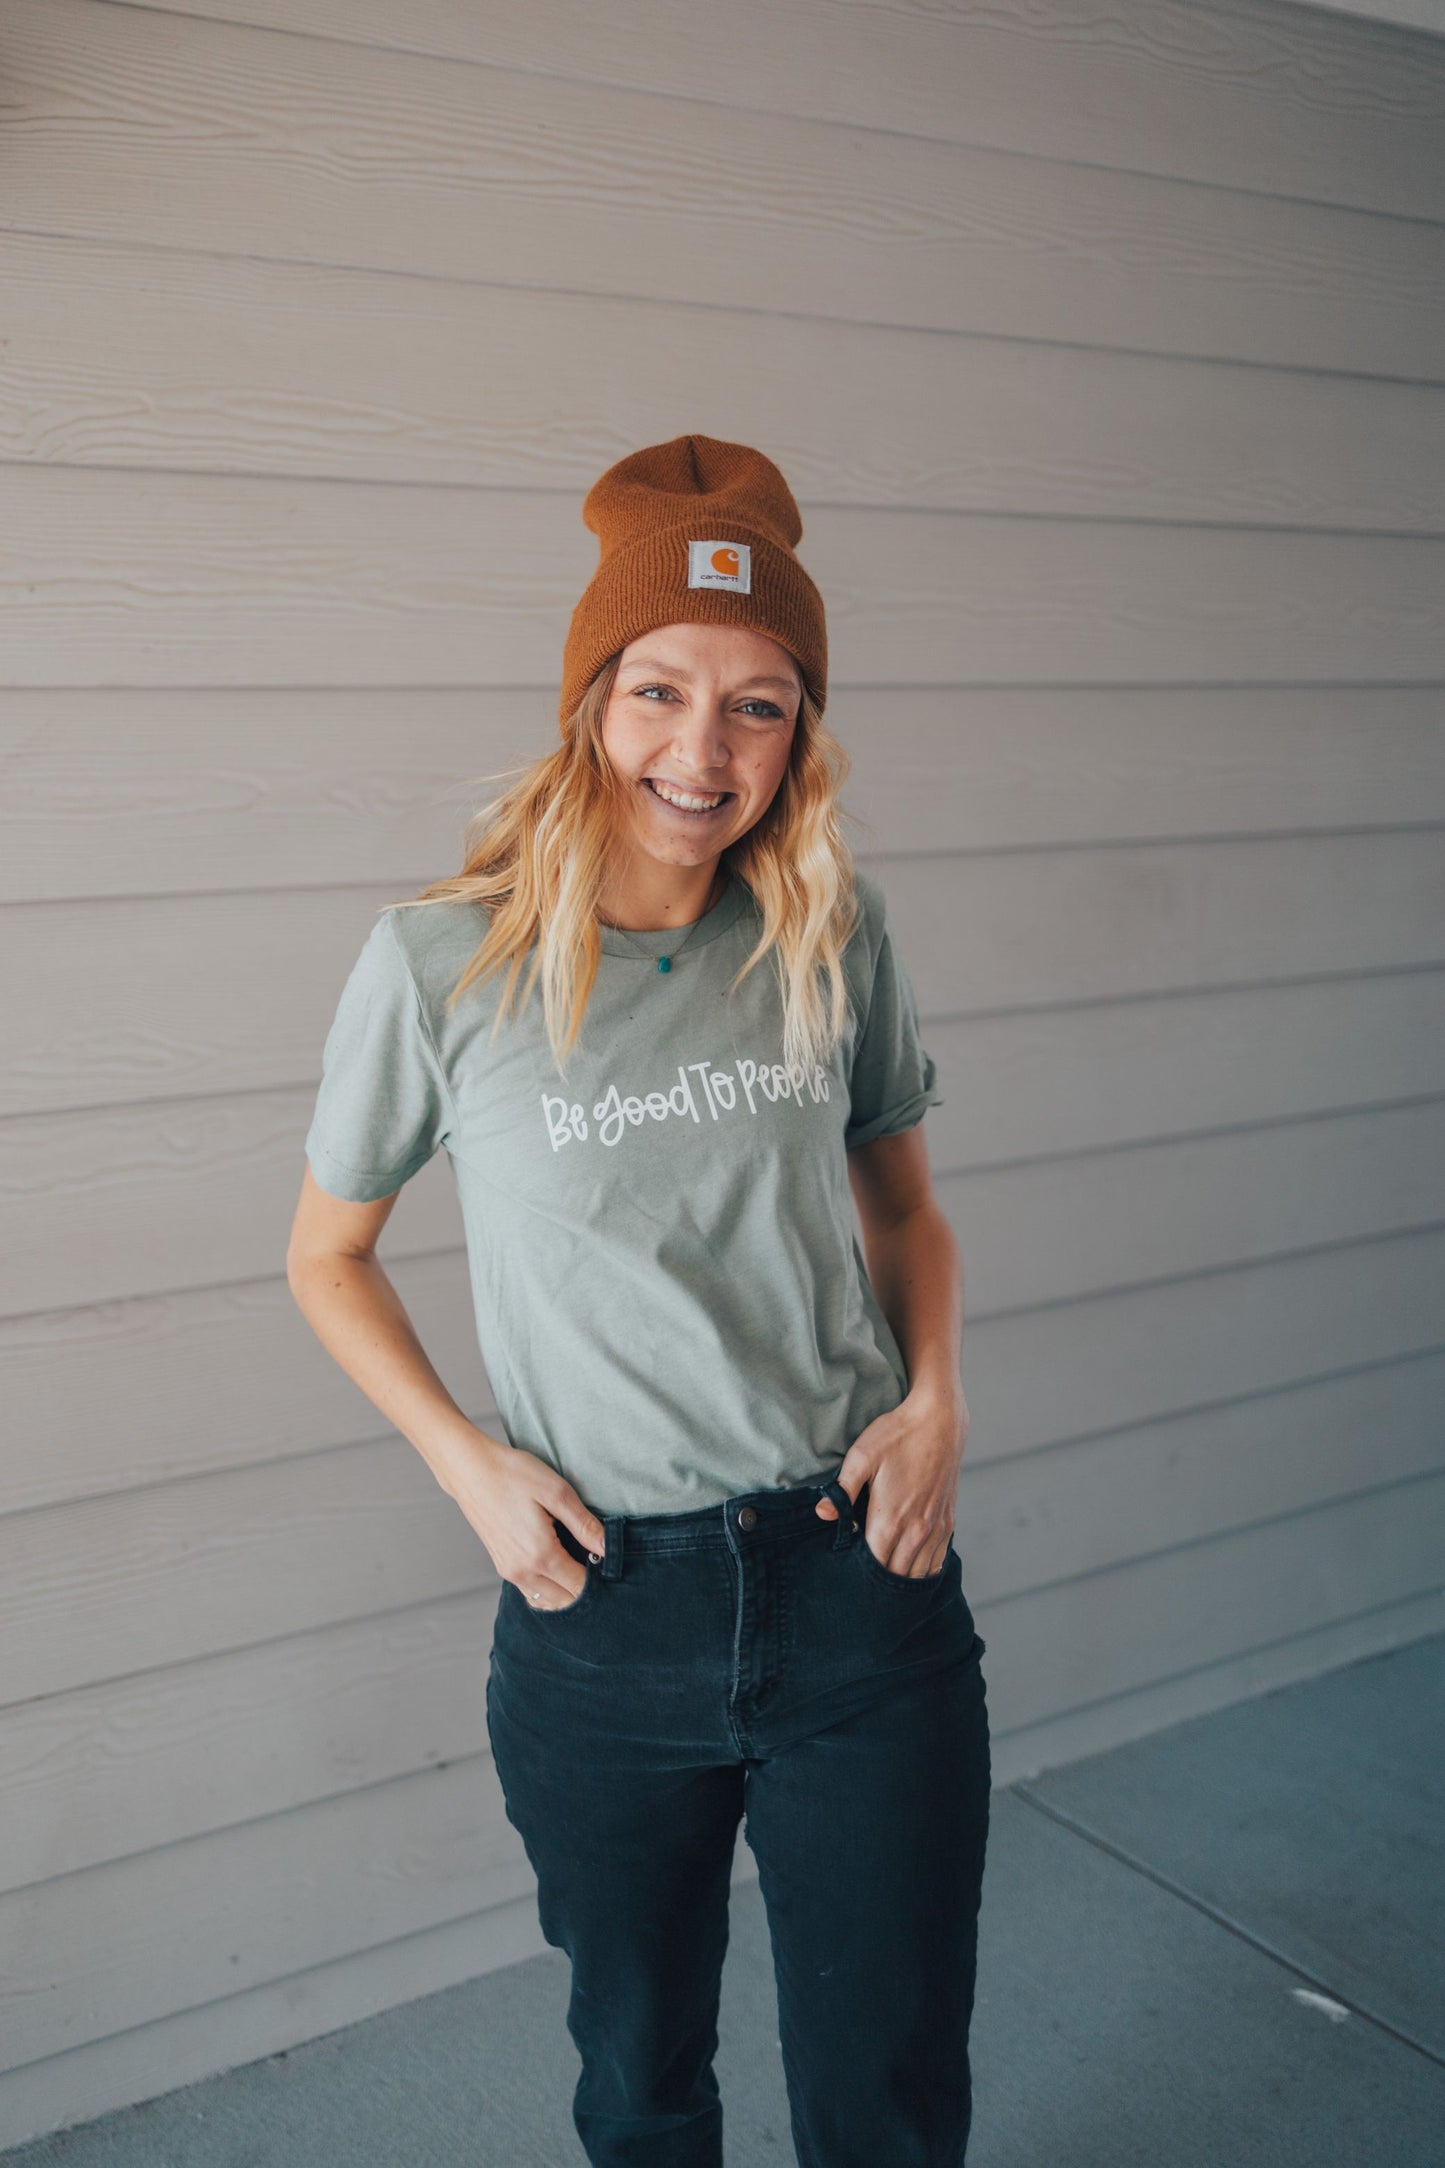 Be Good to People Sage Green Short Sleeved Tee.